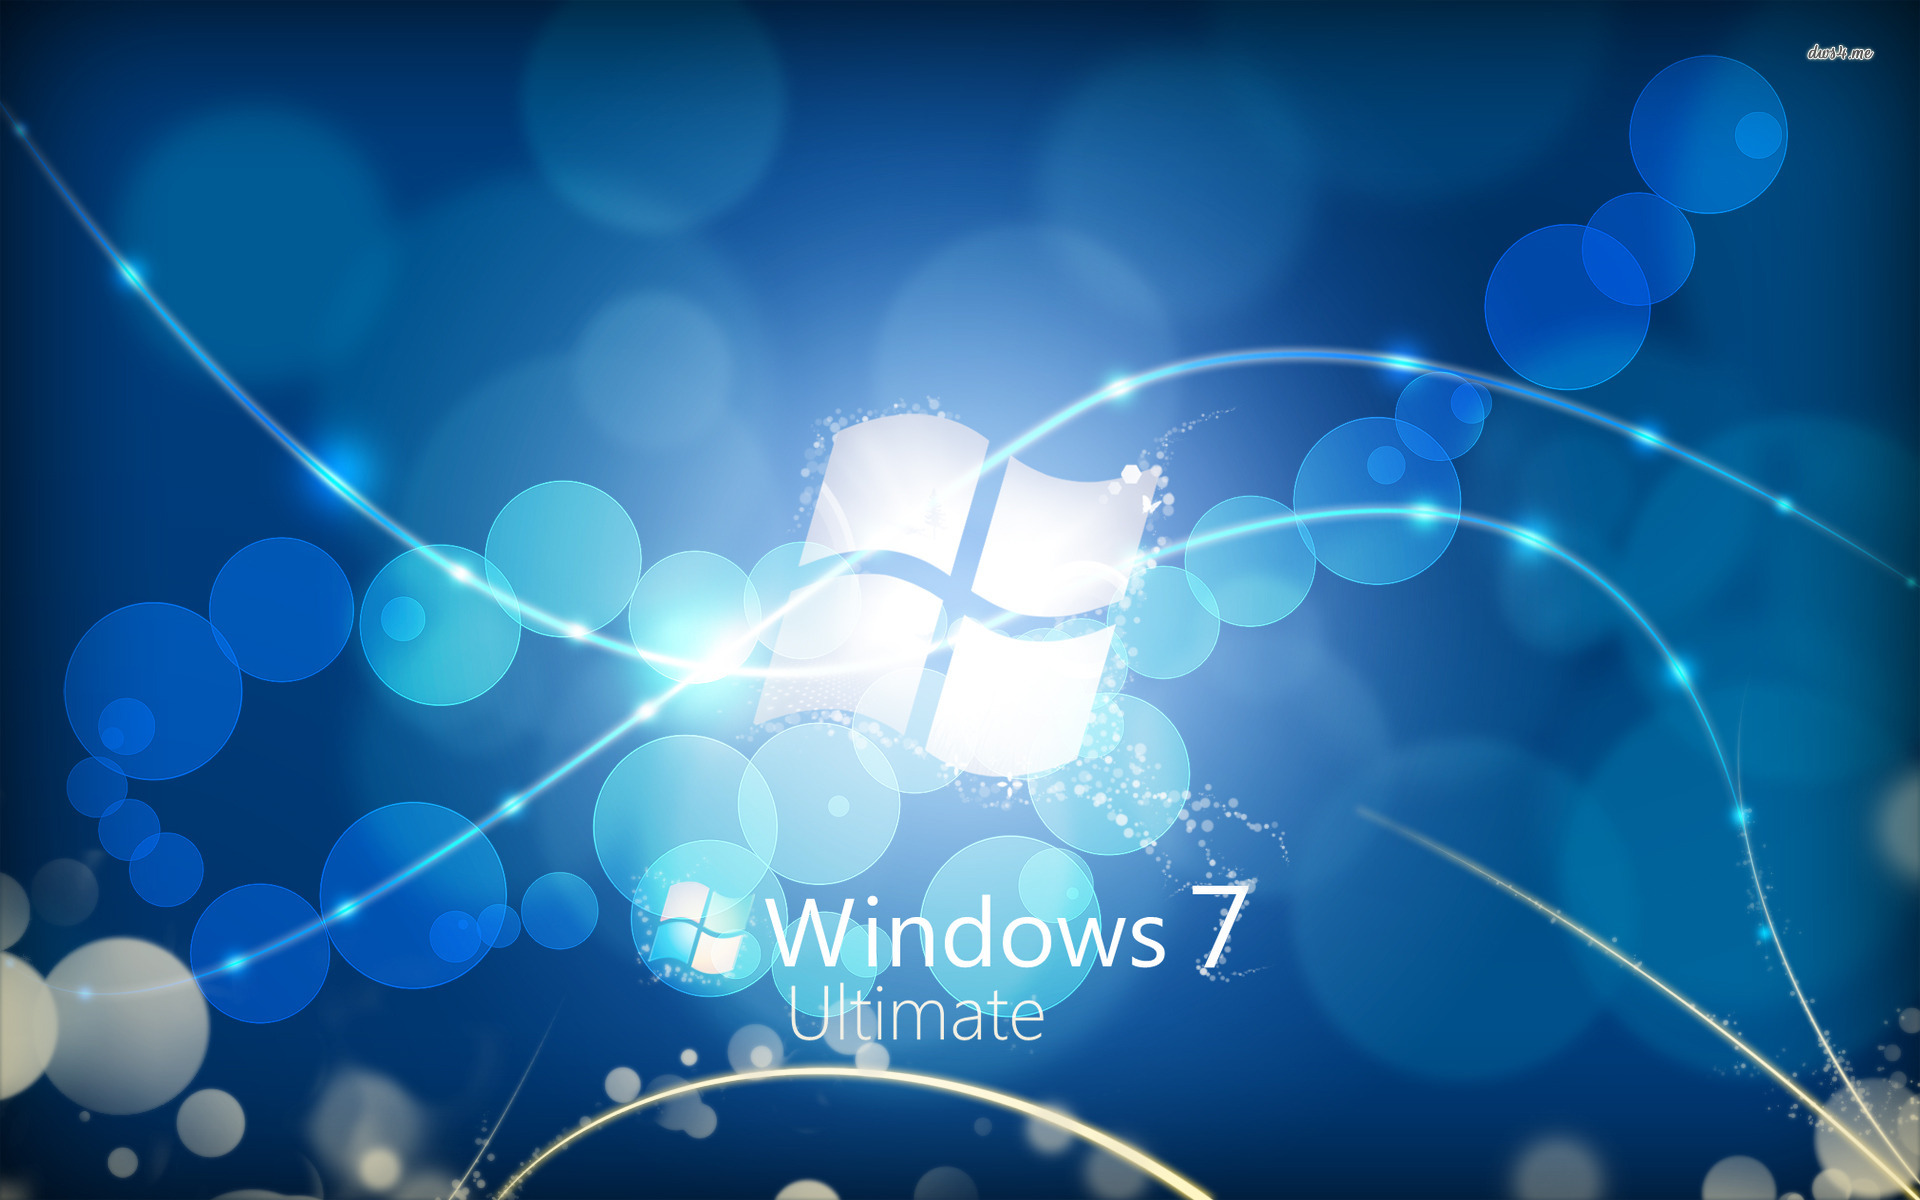 Post Windows Ultimate HD Wallpaper Appeared First On